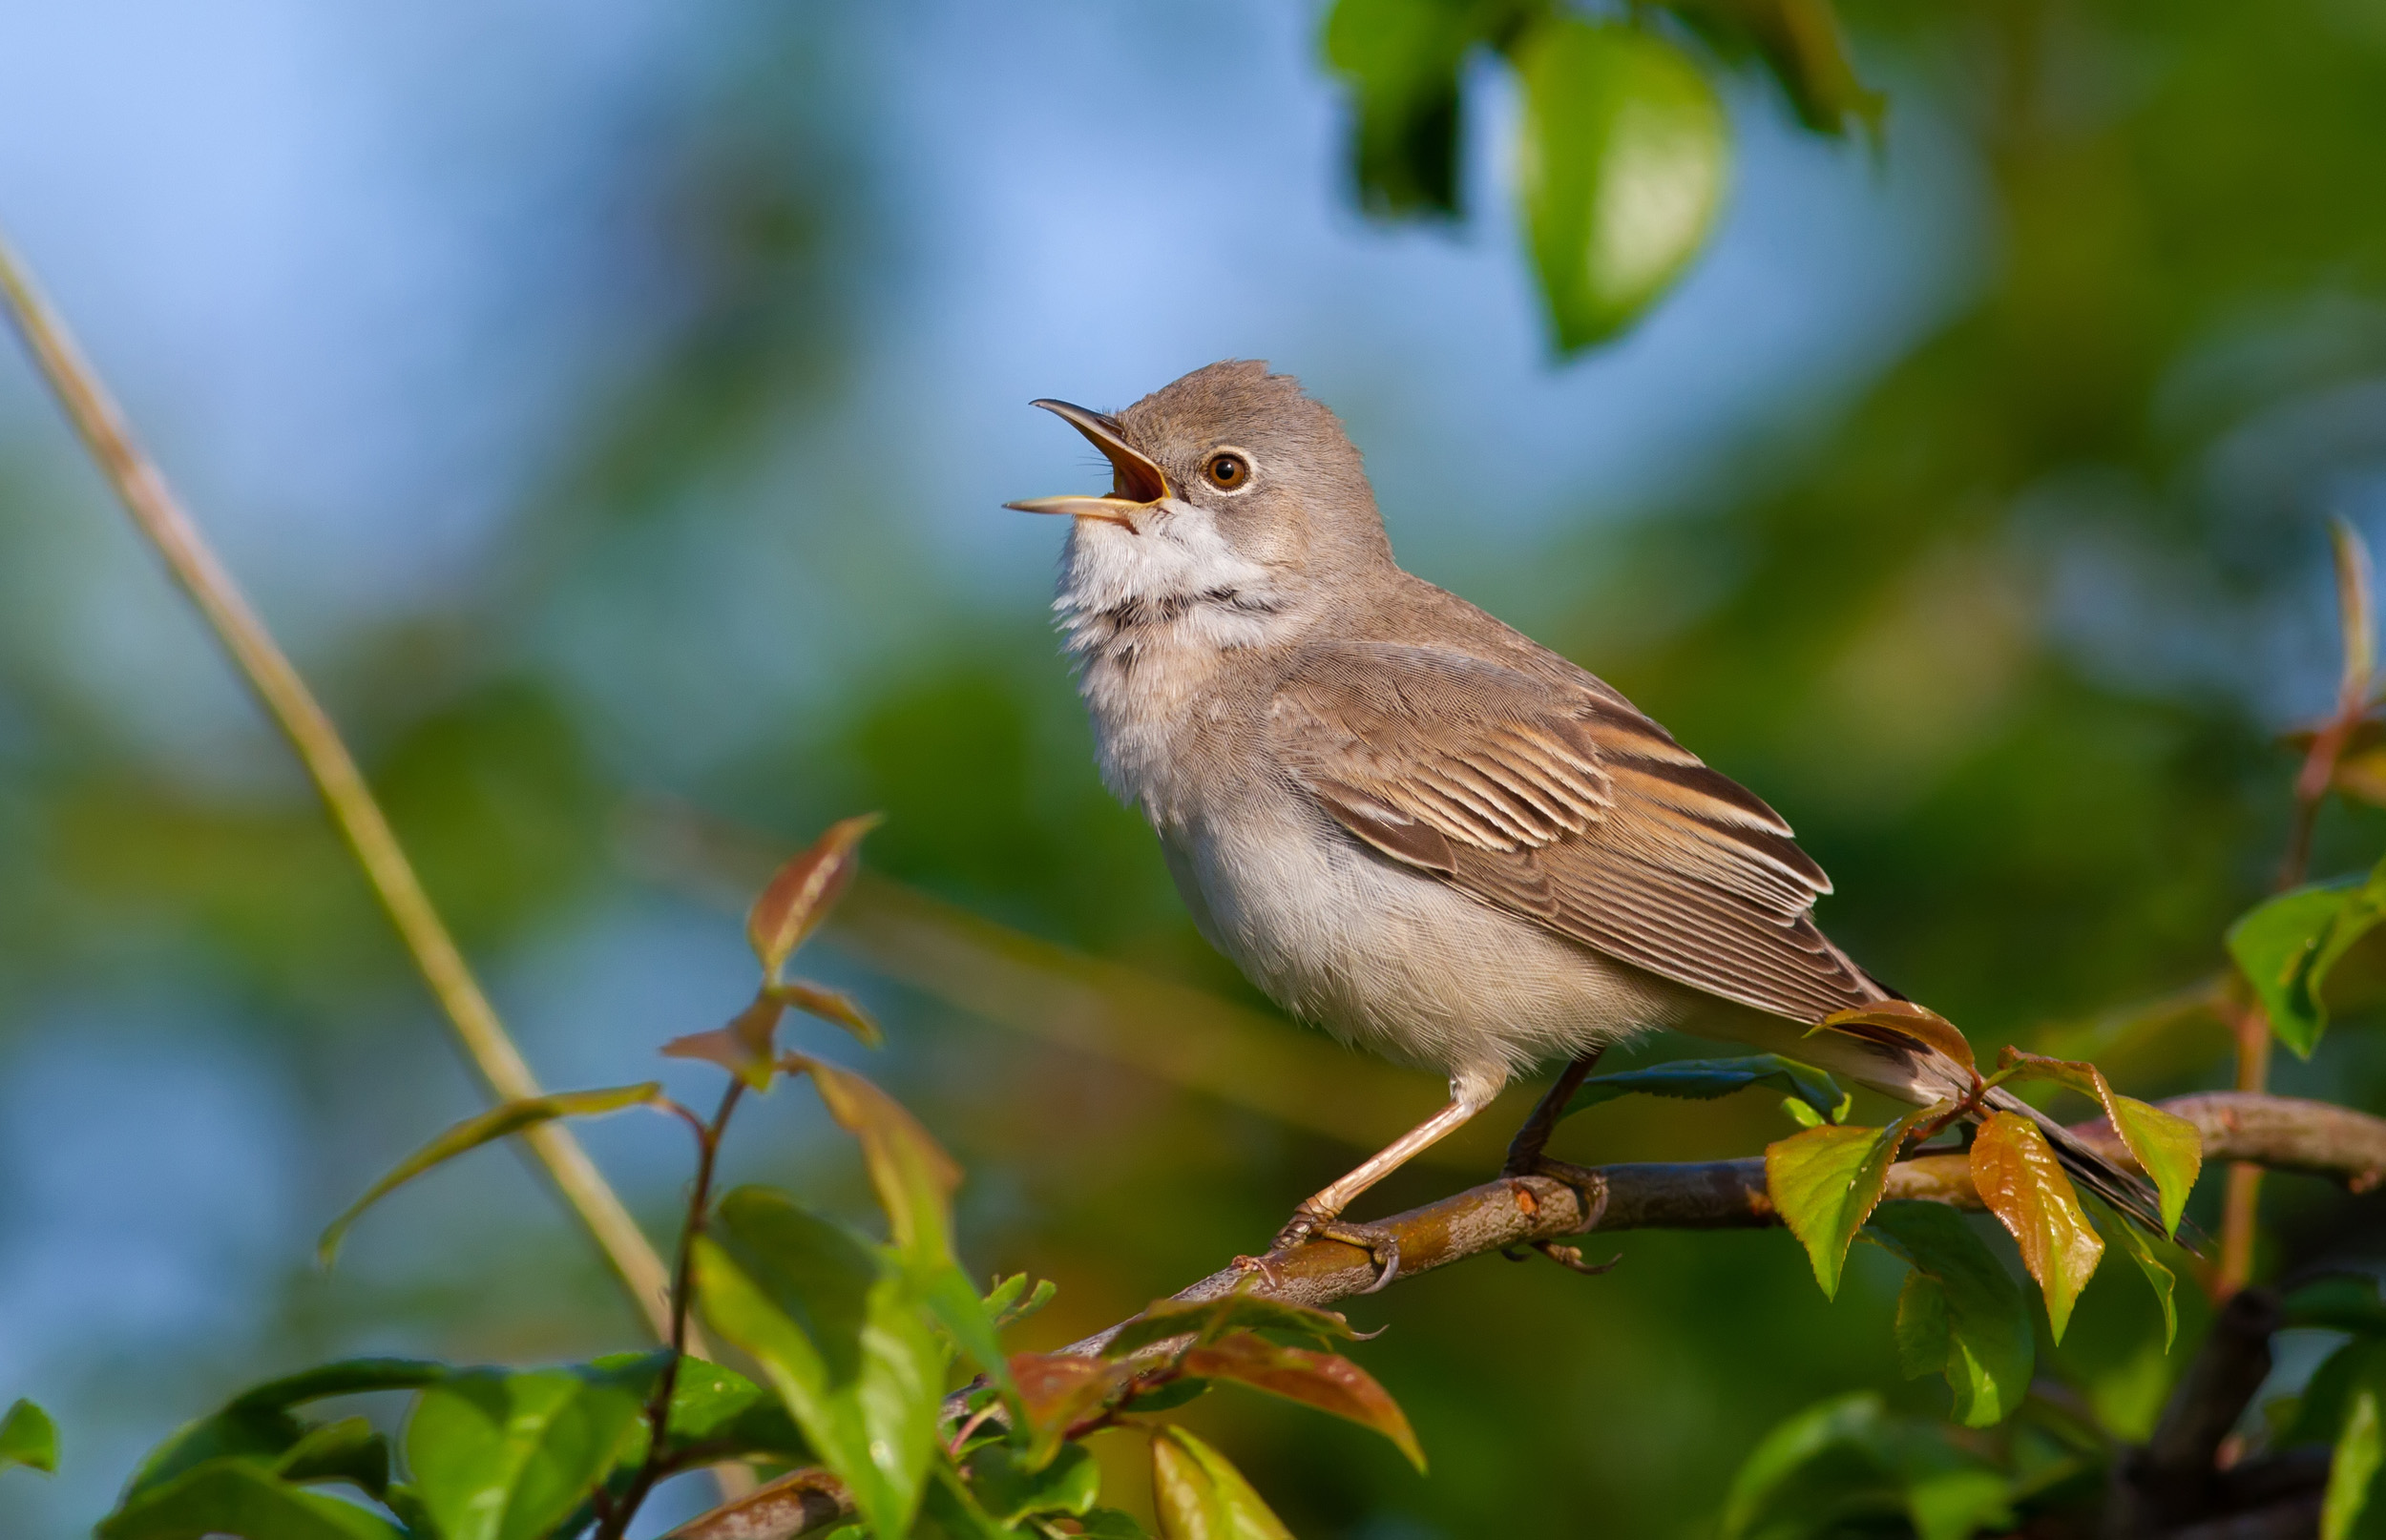 A lone male Whitethroat perched on a branch amongst leaves singing.